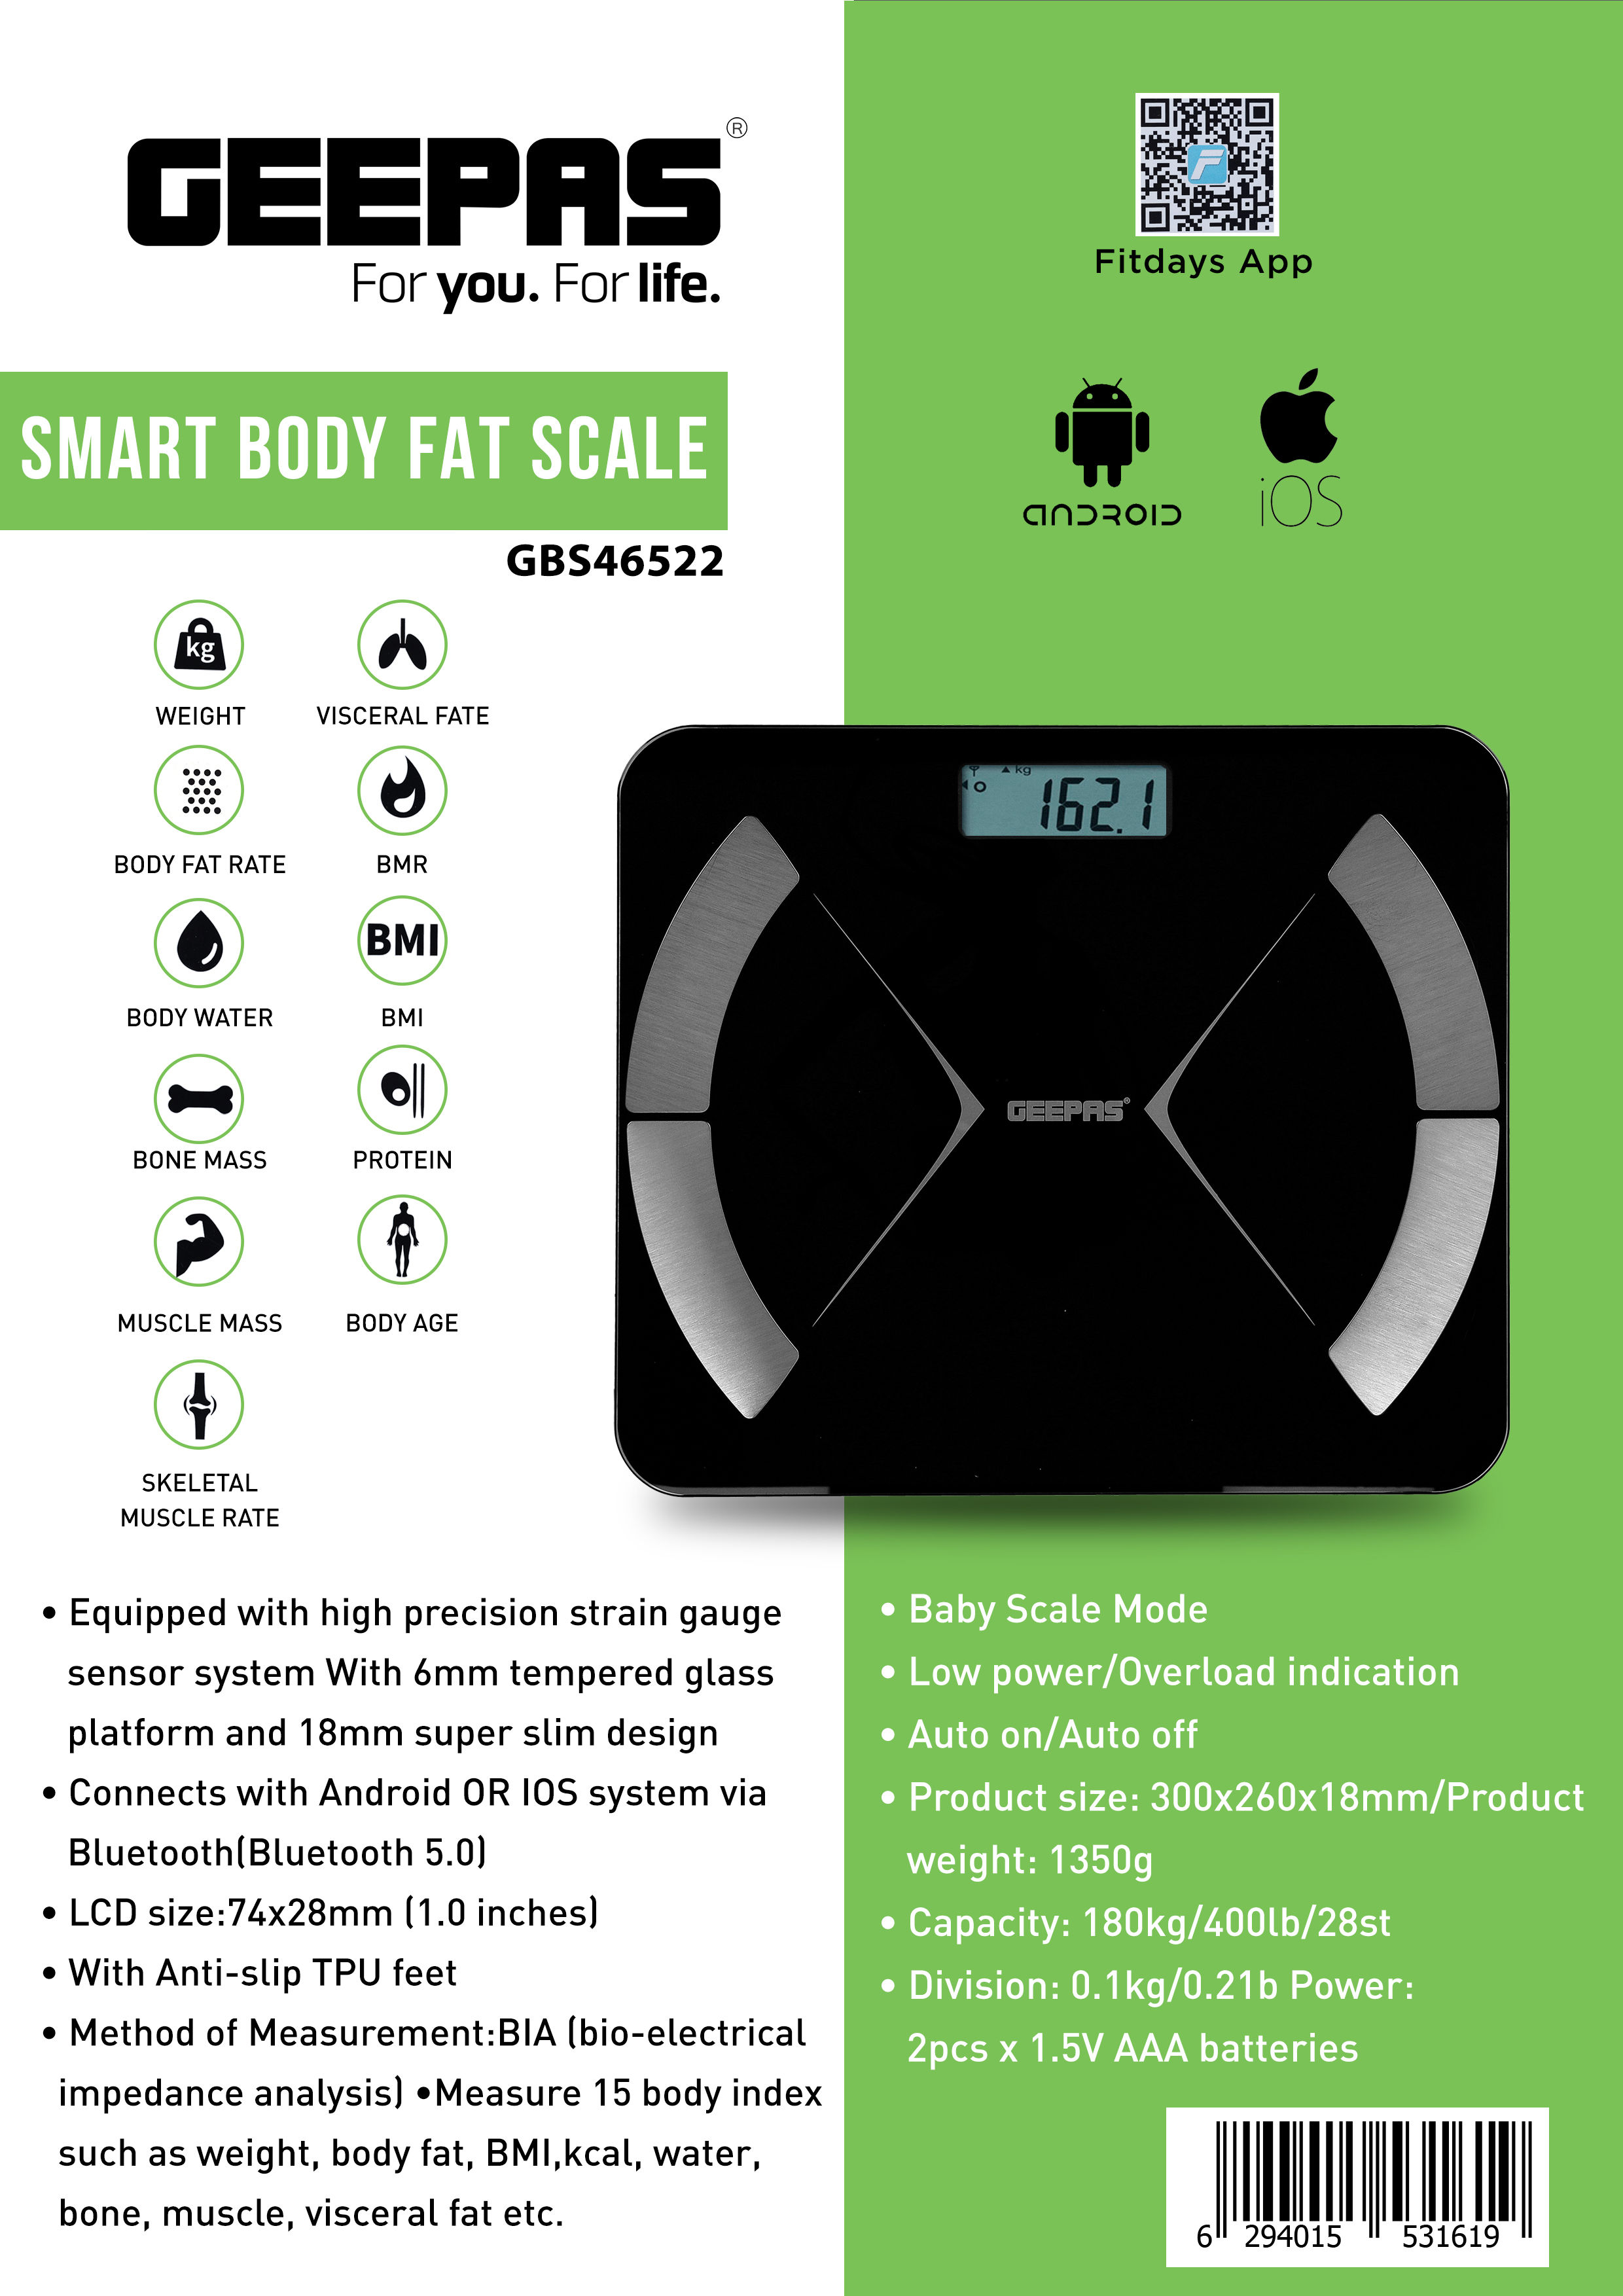 How do you connect your Silvergear scale to the Fitdays app